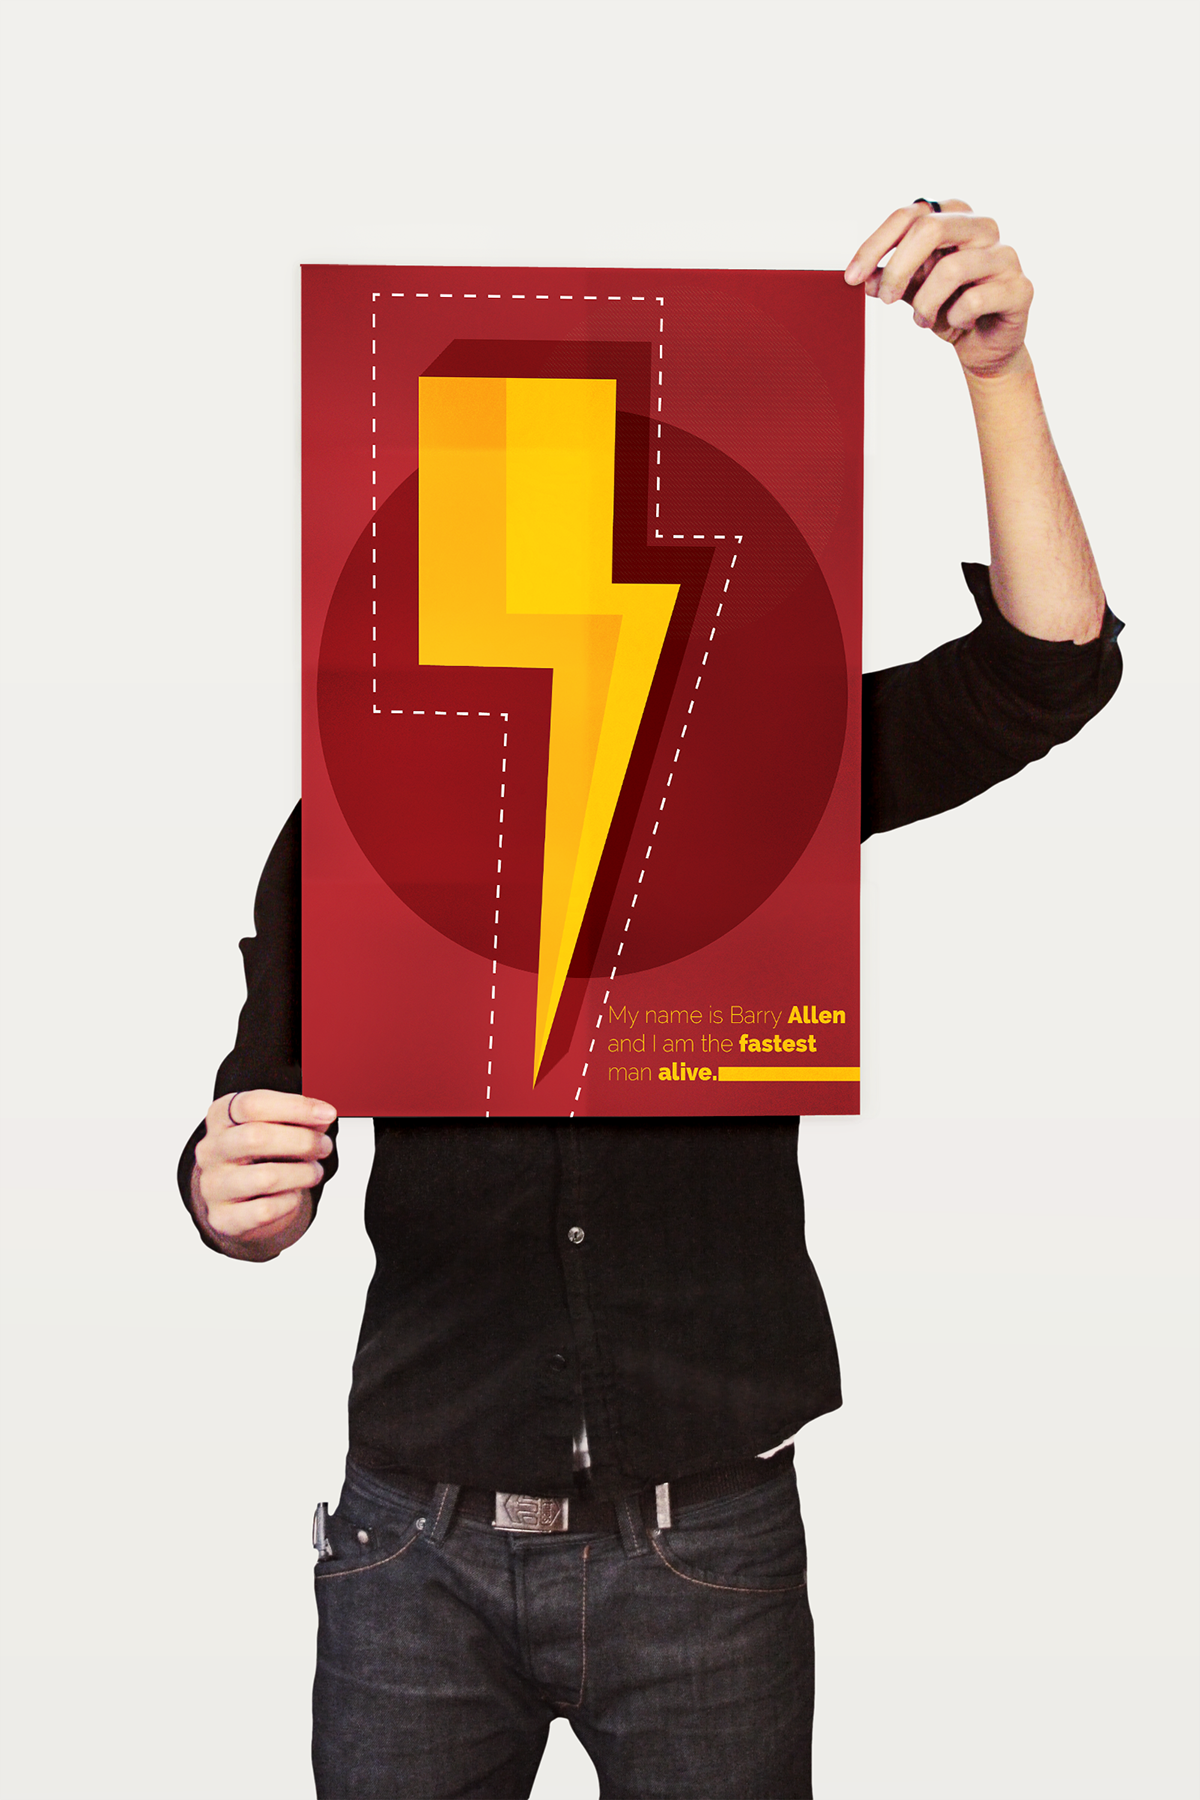 The Flash poster decoration red vermelho